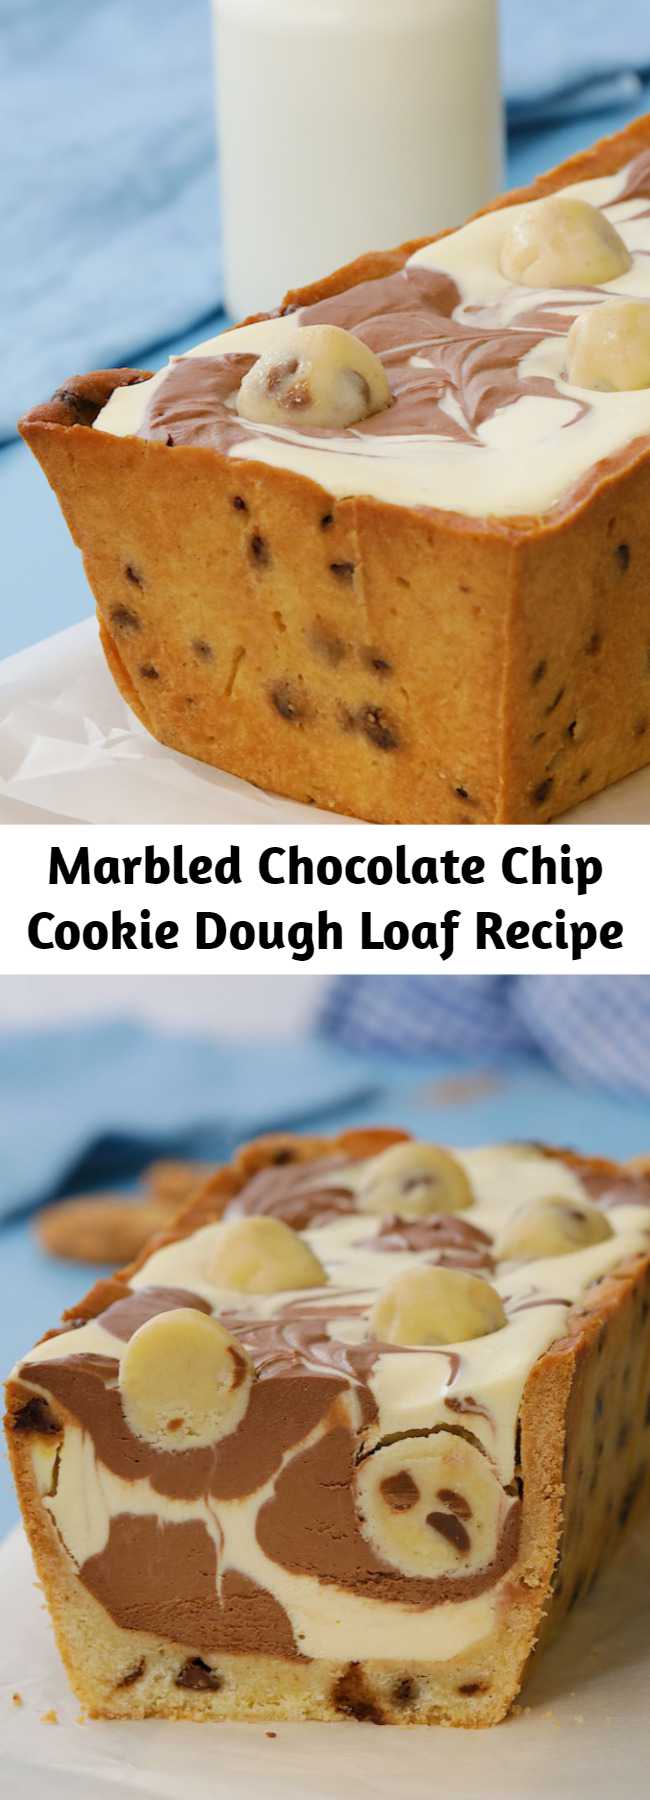 Marbled Chocolate Chip Cookie Dough Loaf Recipe - This chocolate chip cookie dough loaf is simply marbelous!